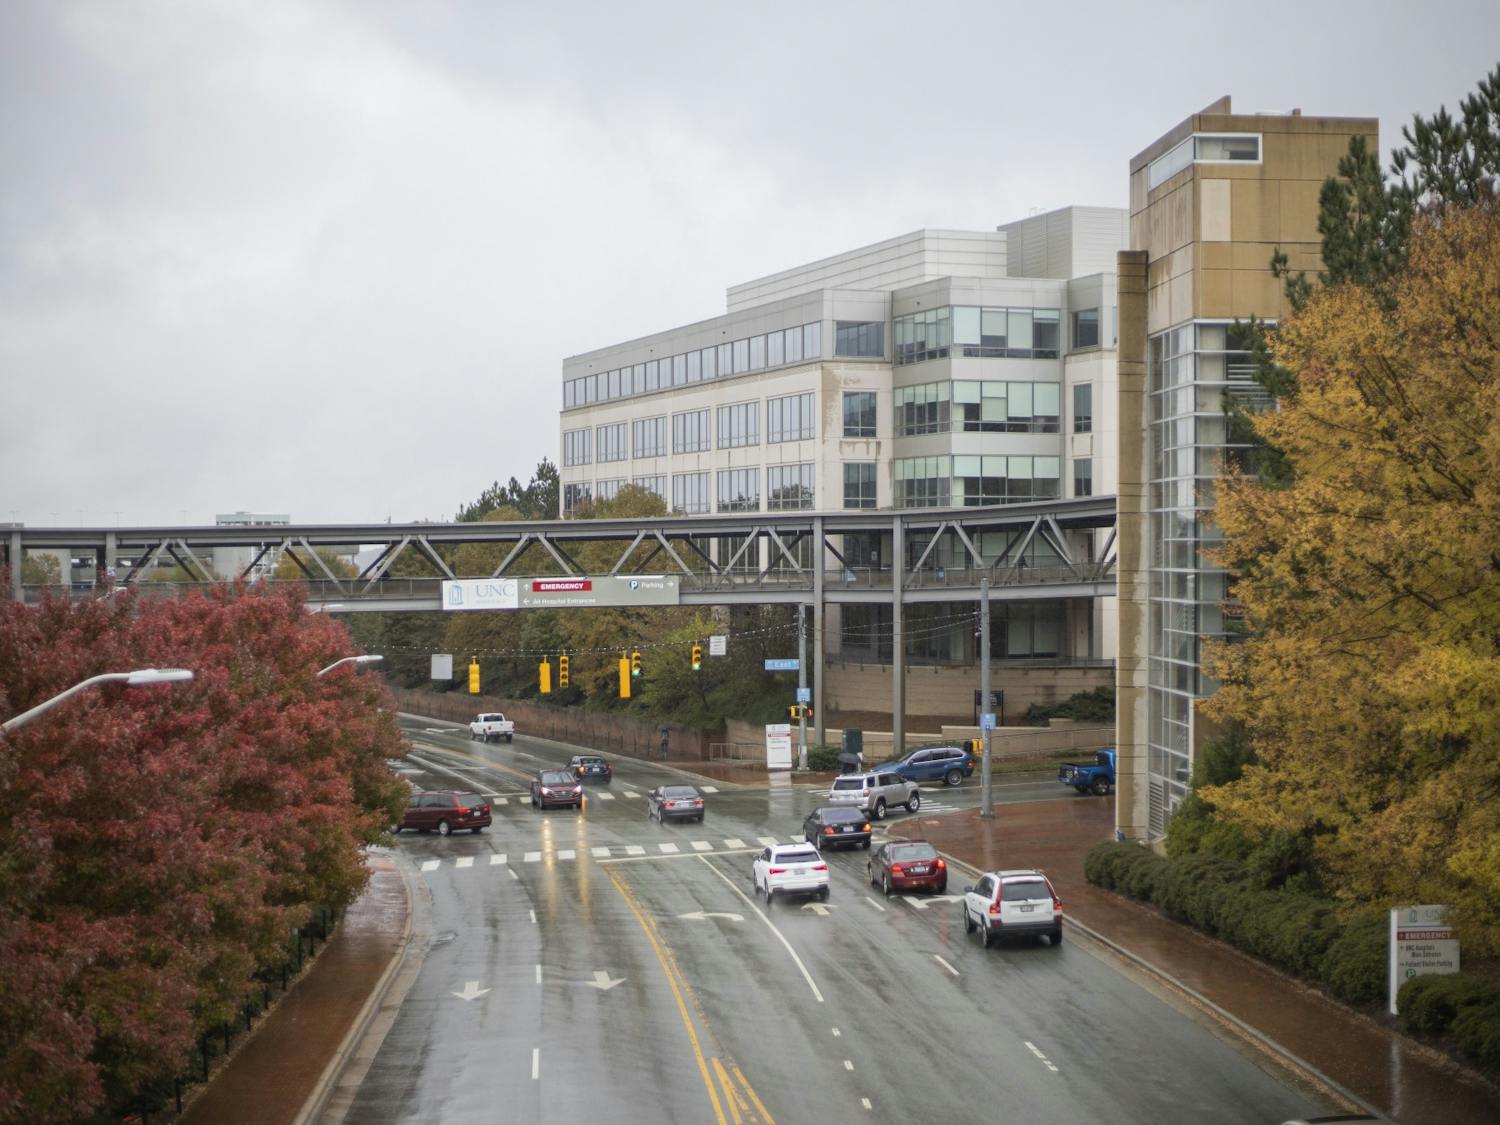 The UNC School of Medicine announced on Nov. 12, 2019 that it will be sending notification letters to an estimated 3,716 people who may have been affected by a cyber phishing incident with some School of Medicine email accounts.&nbsp;